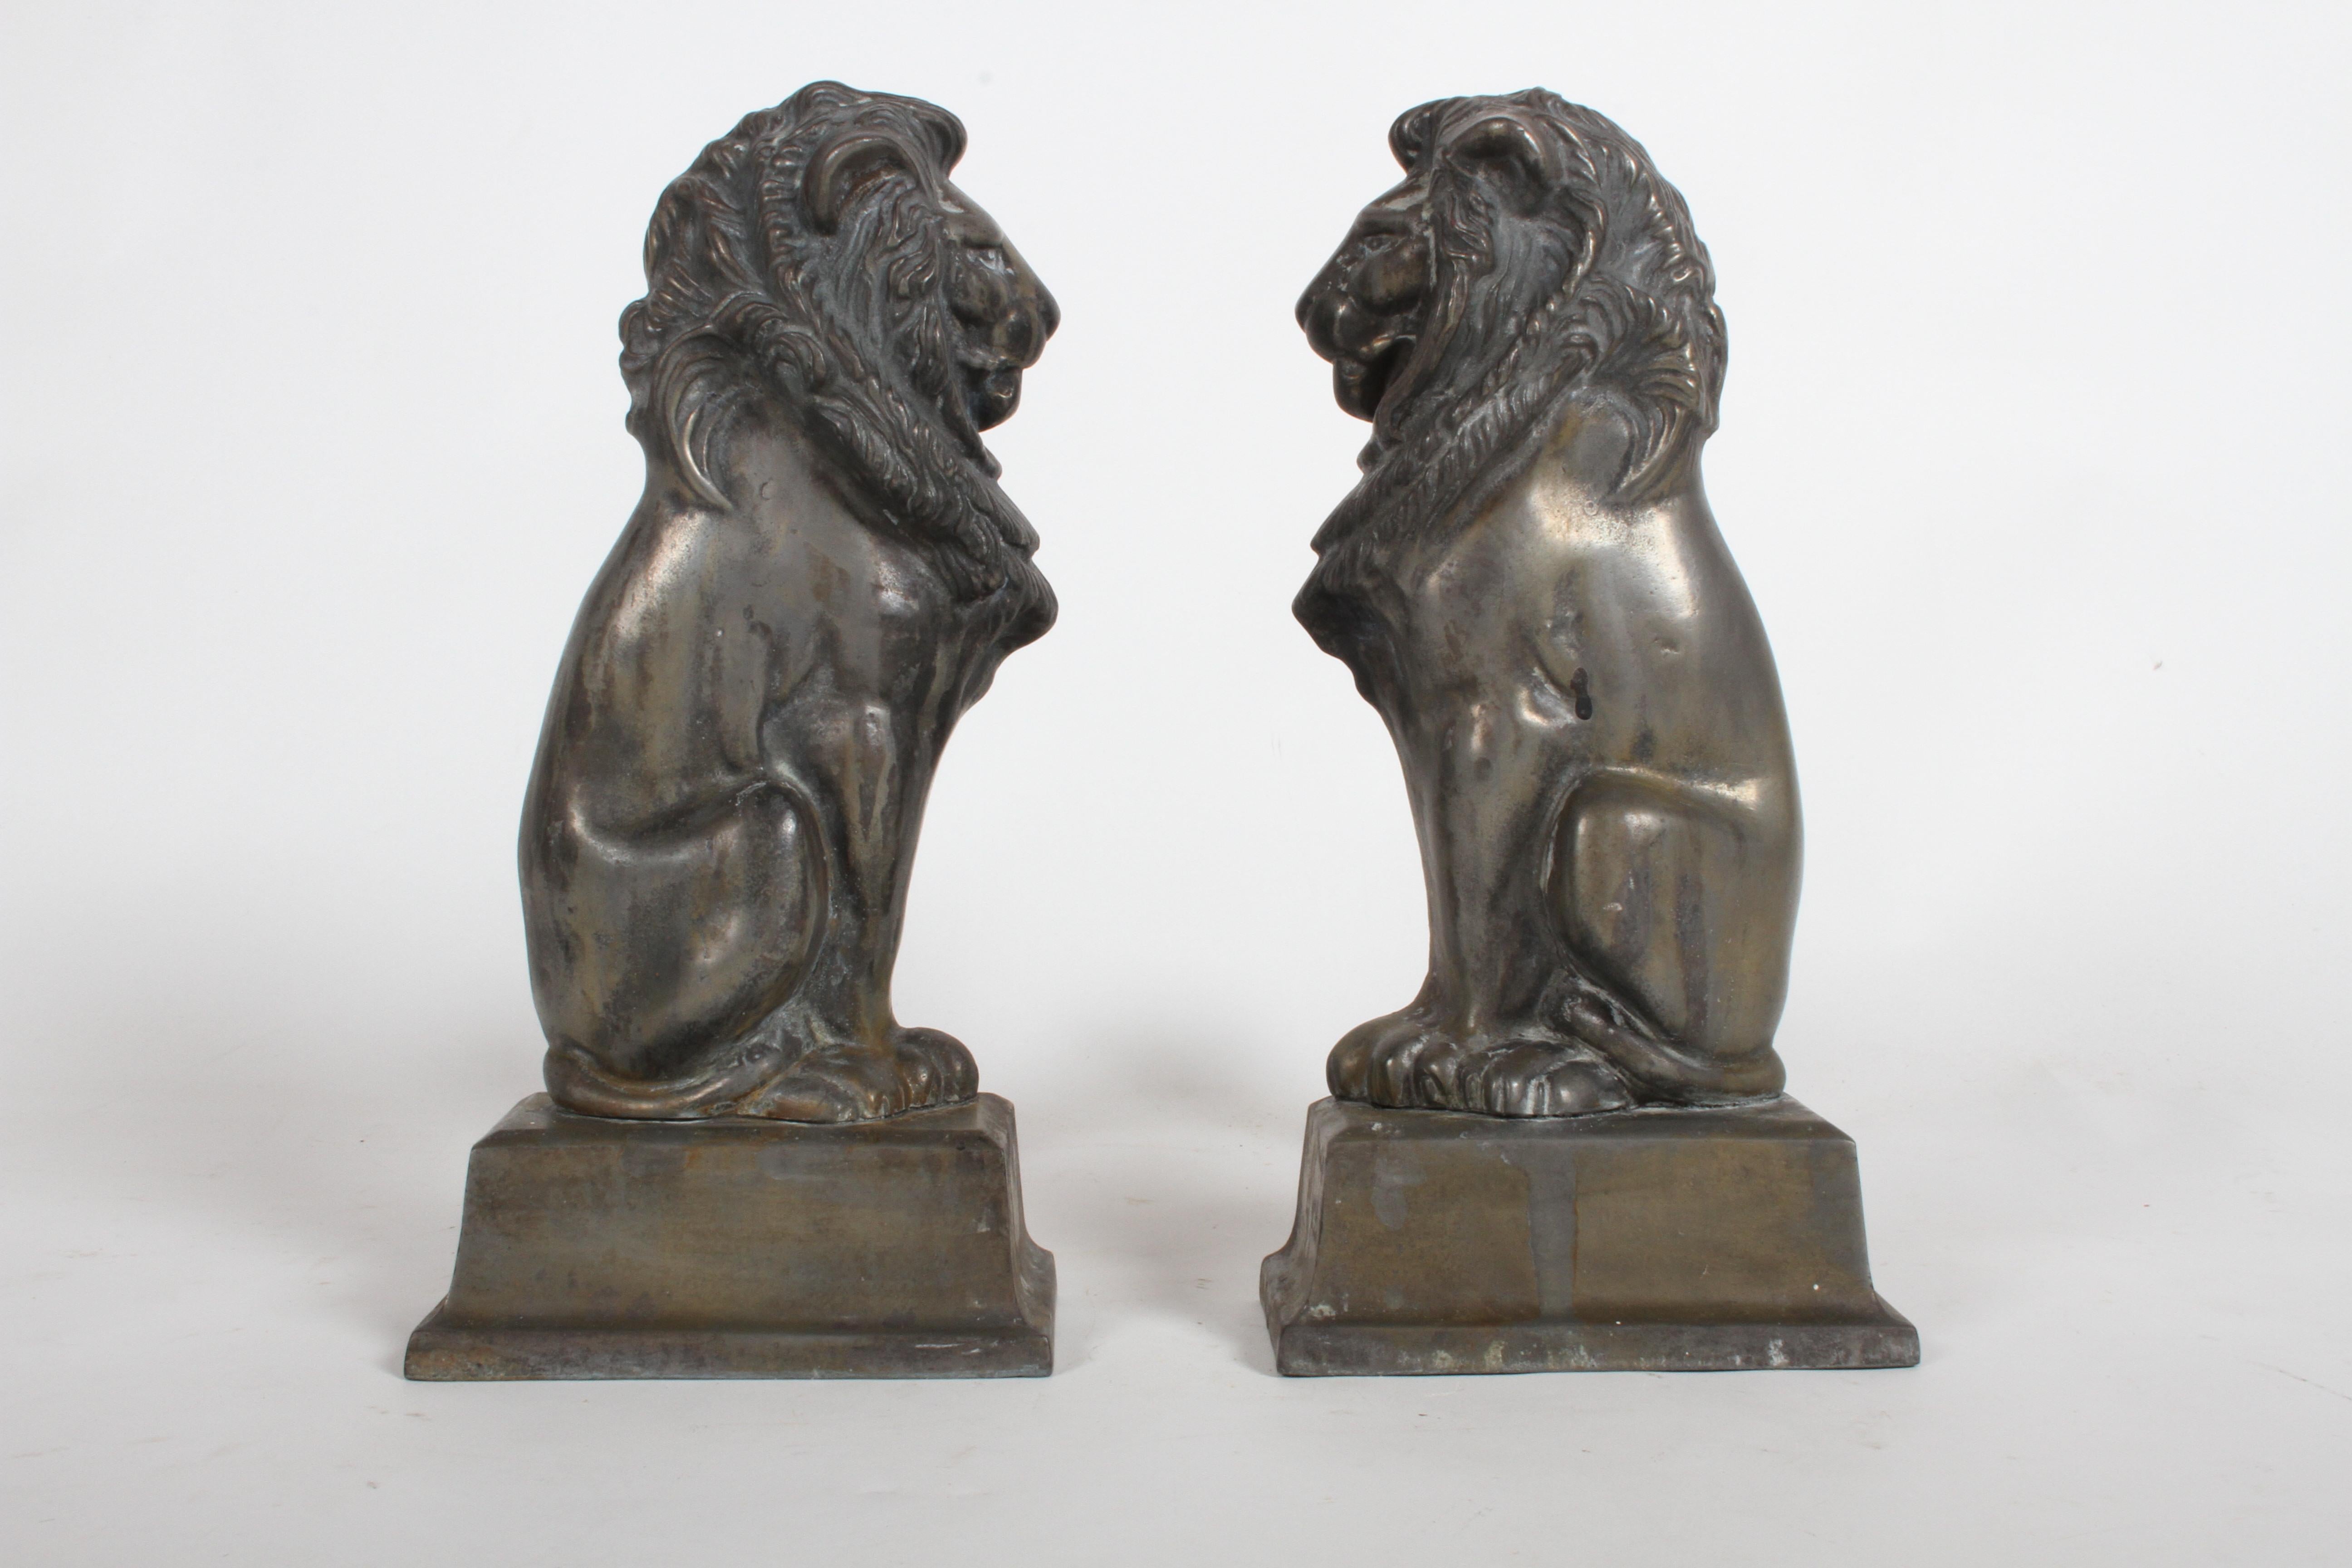 A wonderful pair of cast iron andirons or fire dogs modeled as lions standing on an integral plinth base after sculptor Alfred Stevens (1817-1875. Possibly cast by D. Brucciani and Co. Purchased from a mansion in Kingsbury Place, an historic private